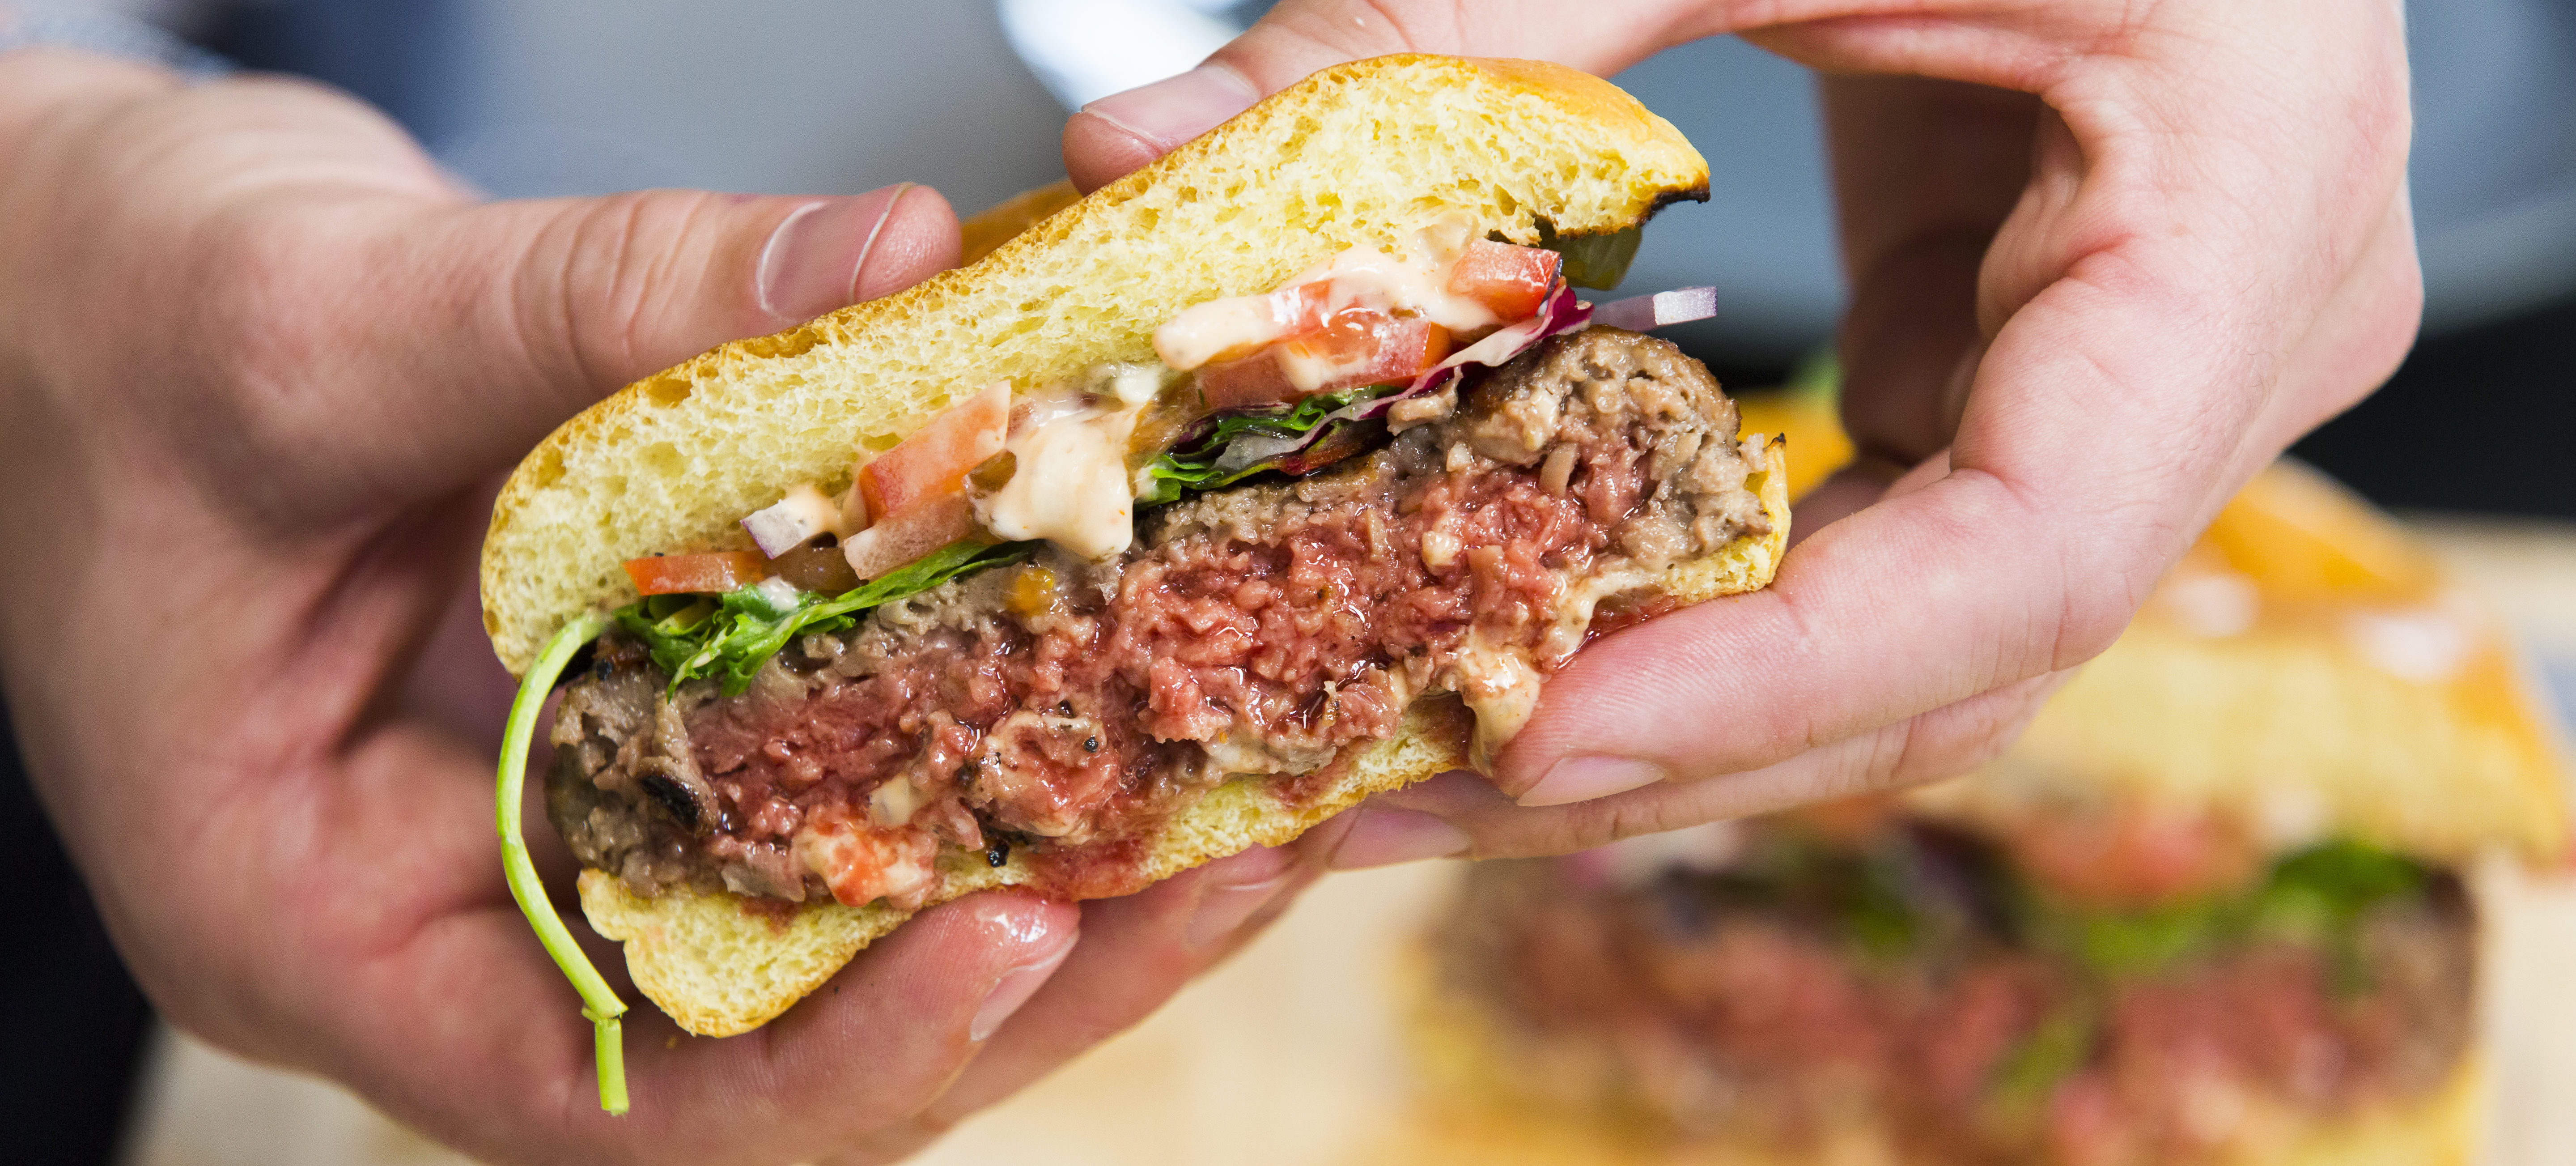 impossible burger meatless